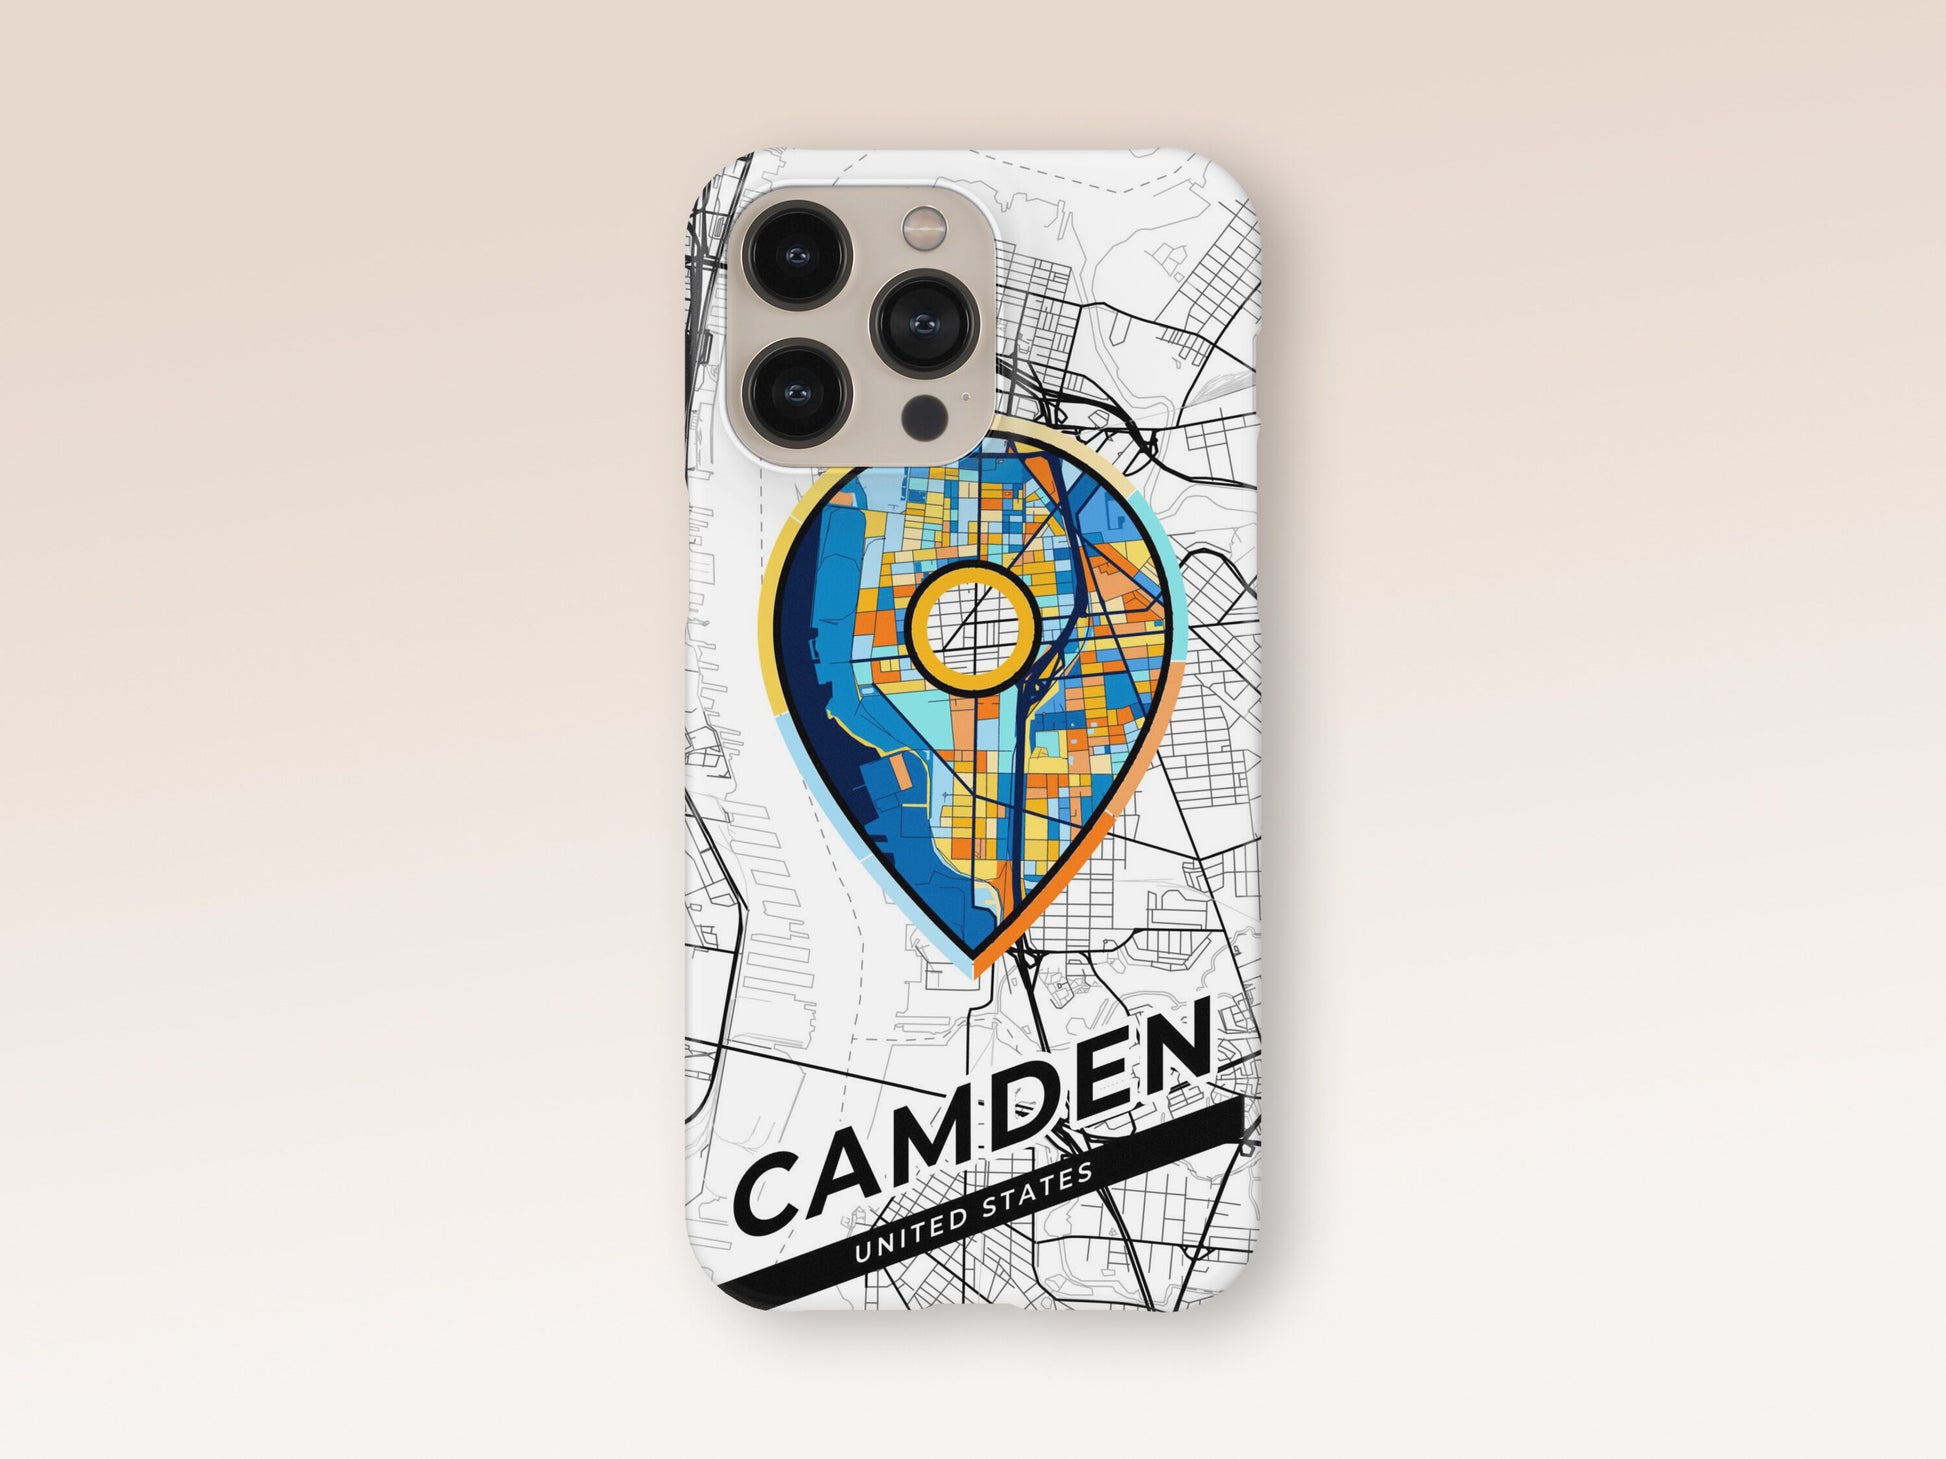 Camden New Jersey slim phone case with colorful icon. Birthday, wedding or housewarming gift. Couple match cases. 1